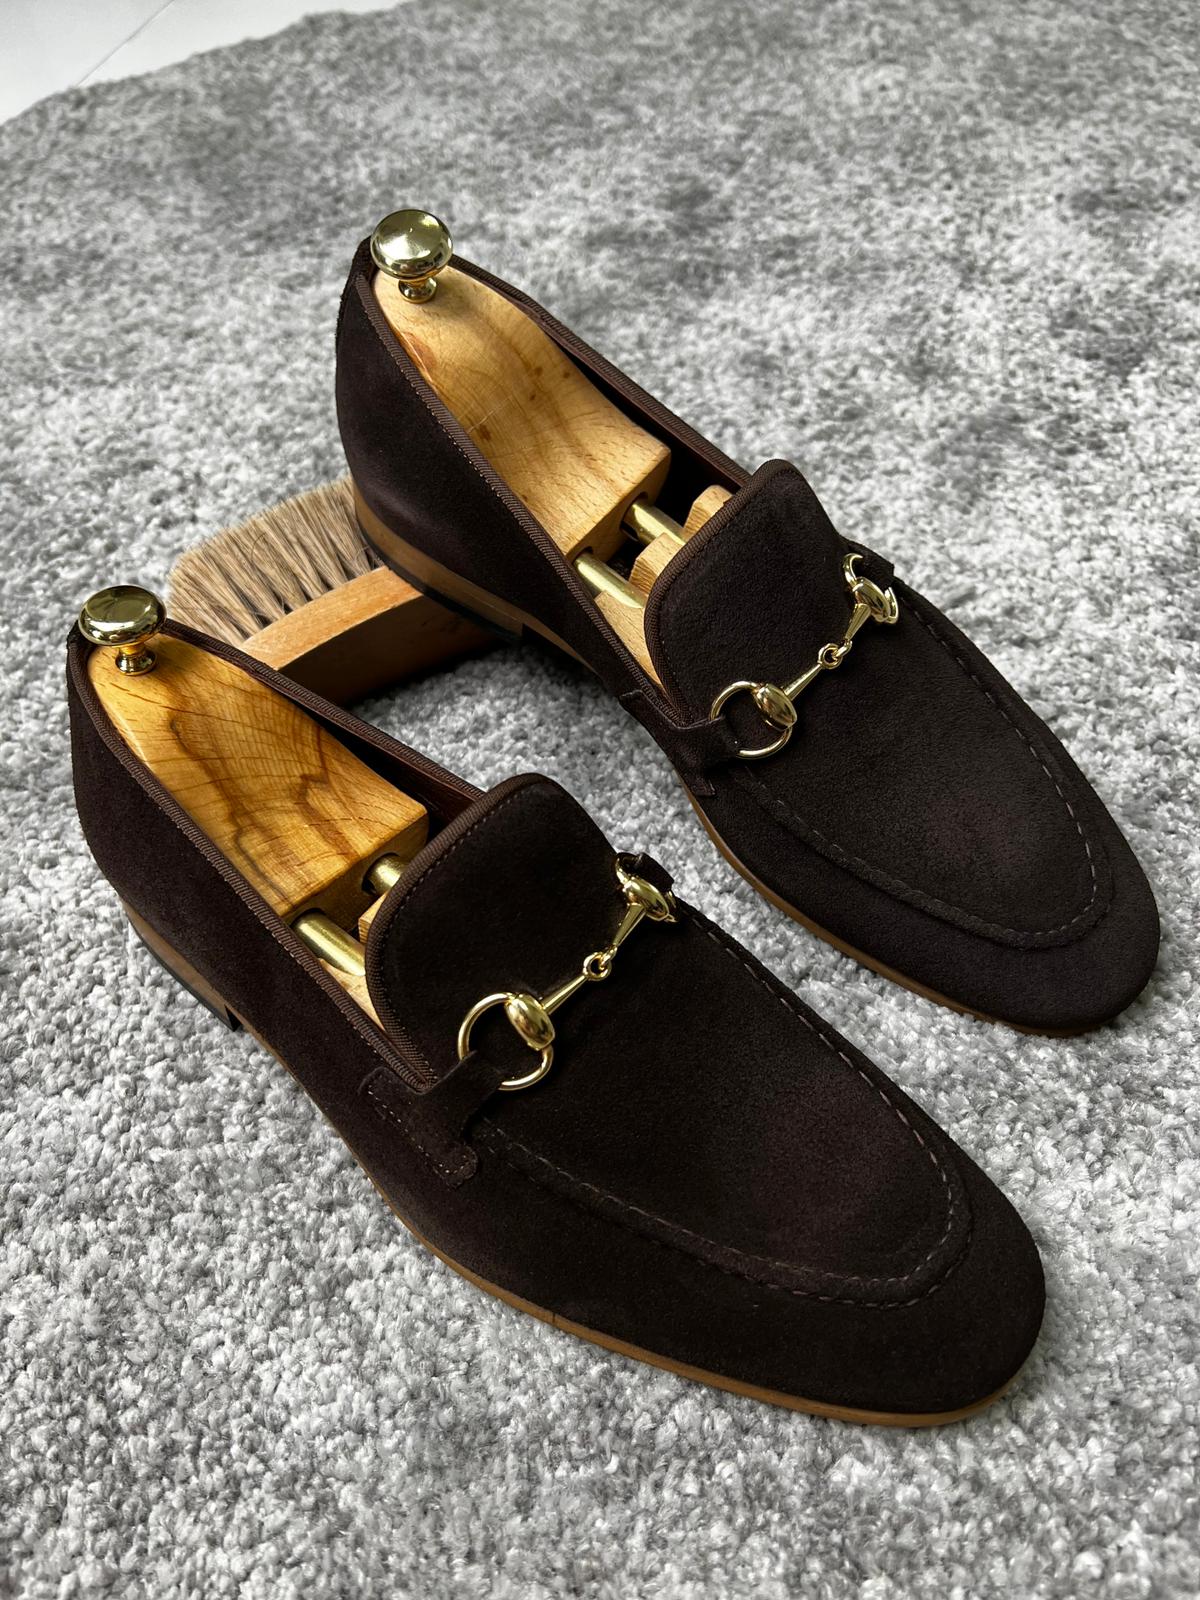 Bojoni Amato Special Edition Neolite Brown Suede Leather Loafer